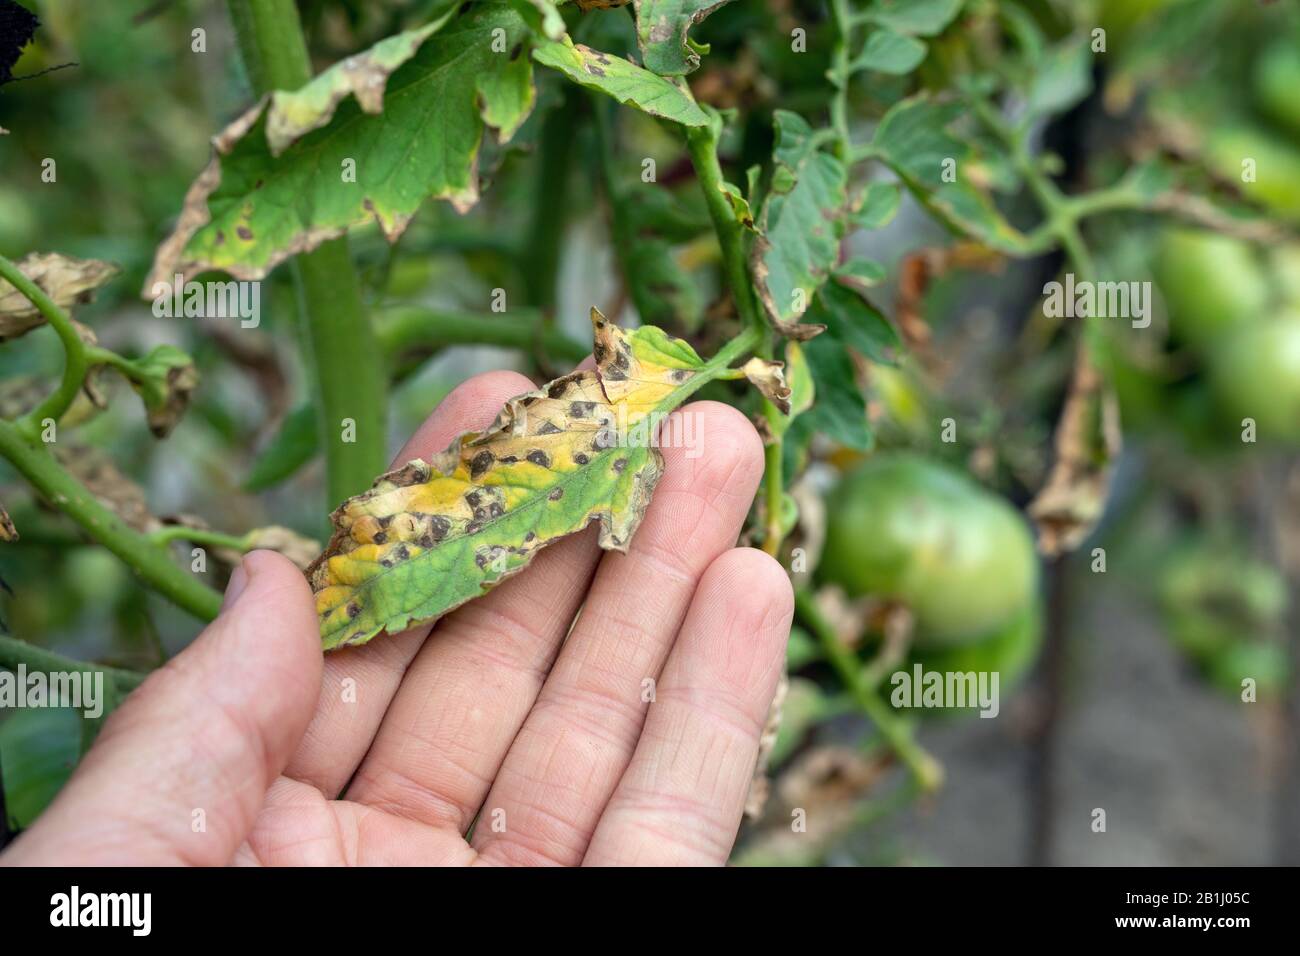 Septoria leaf spot on tomato. damaged by disease and pests of tomato leaves. Stock Photo